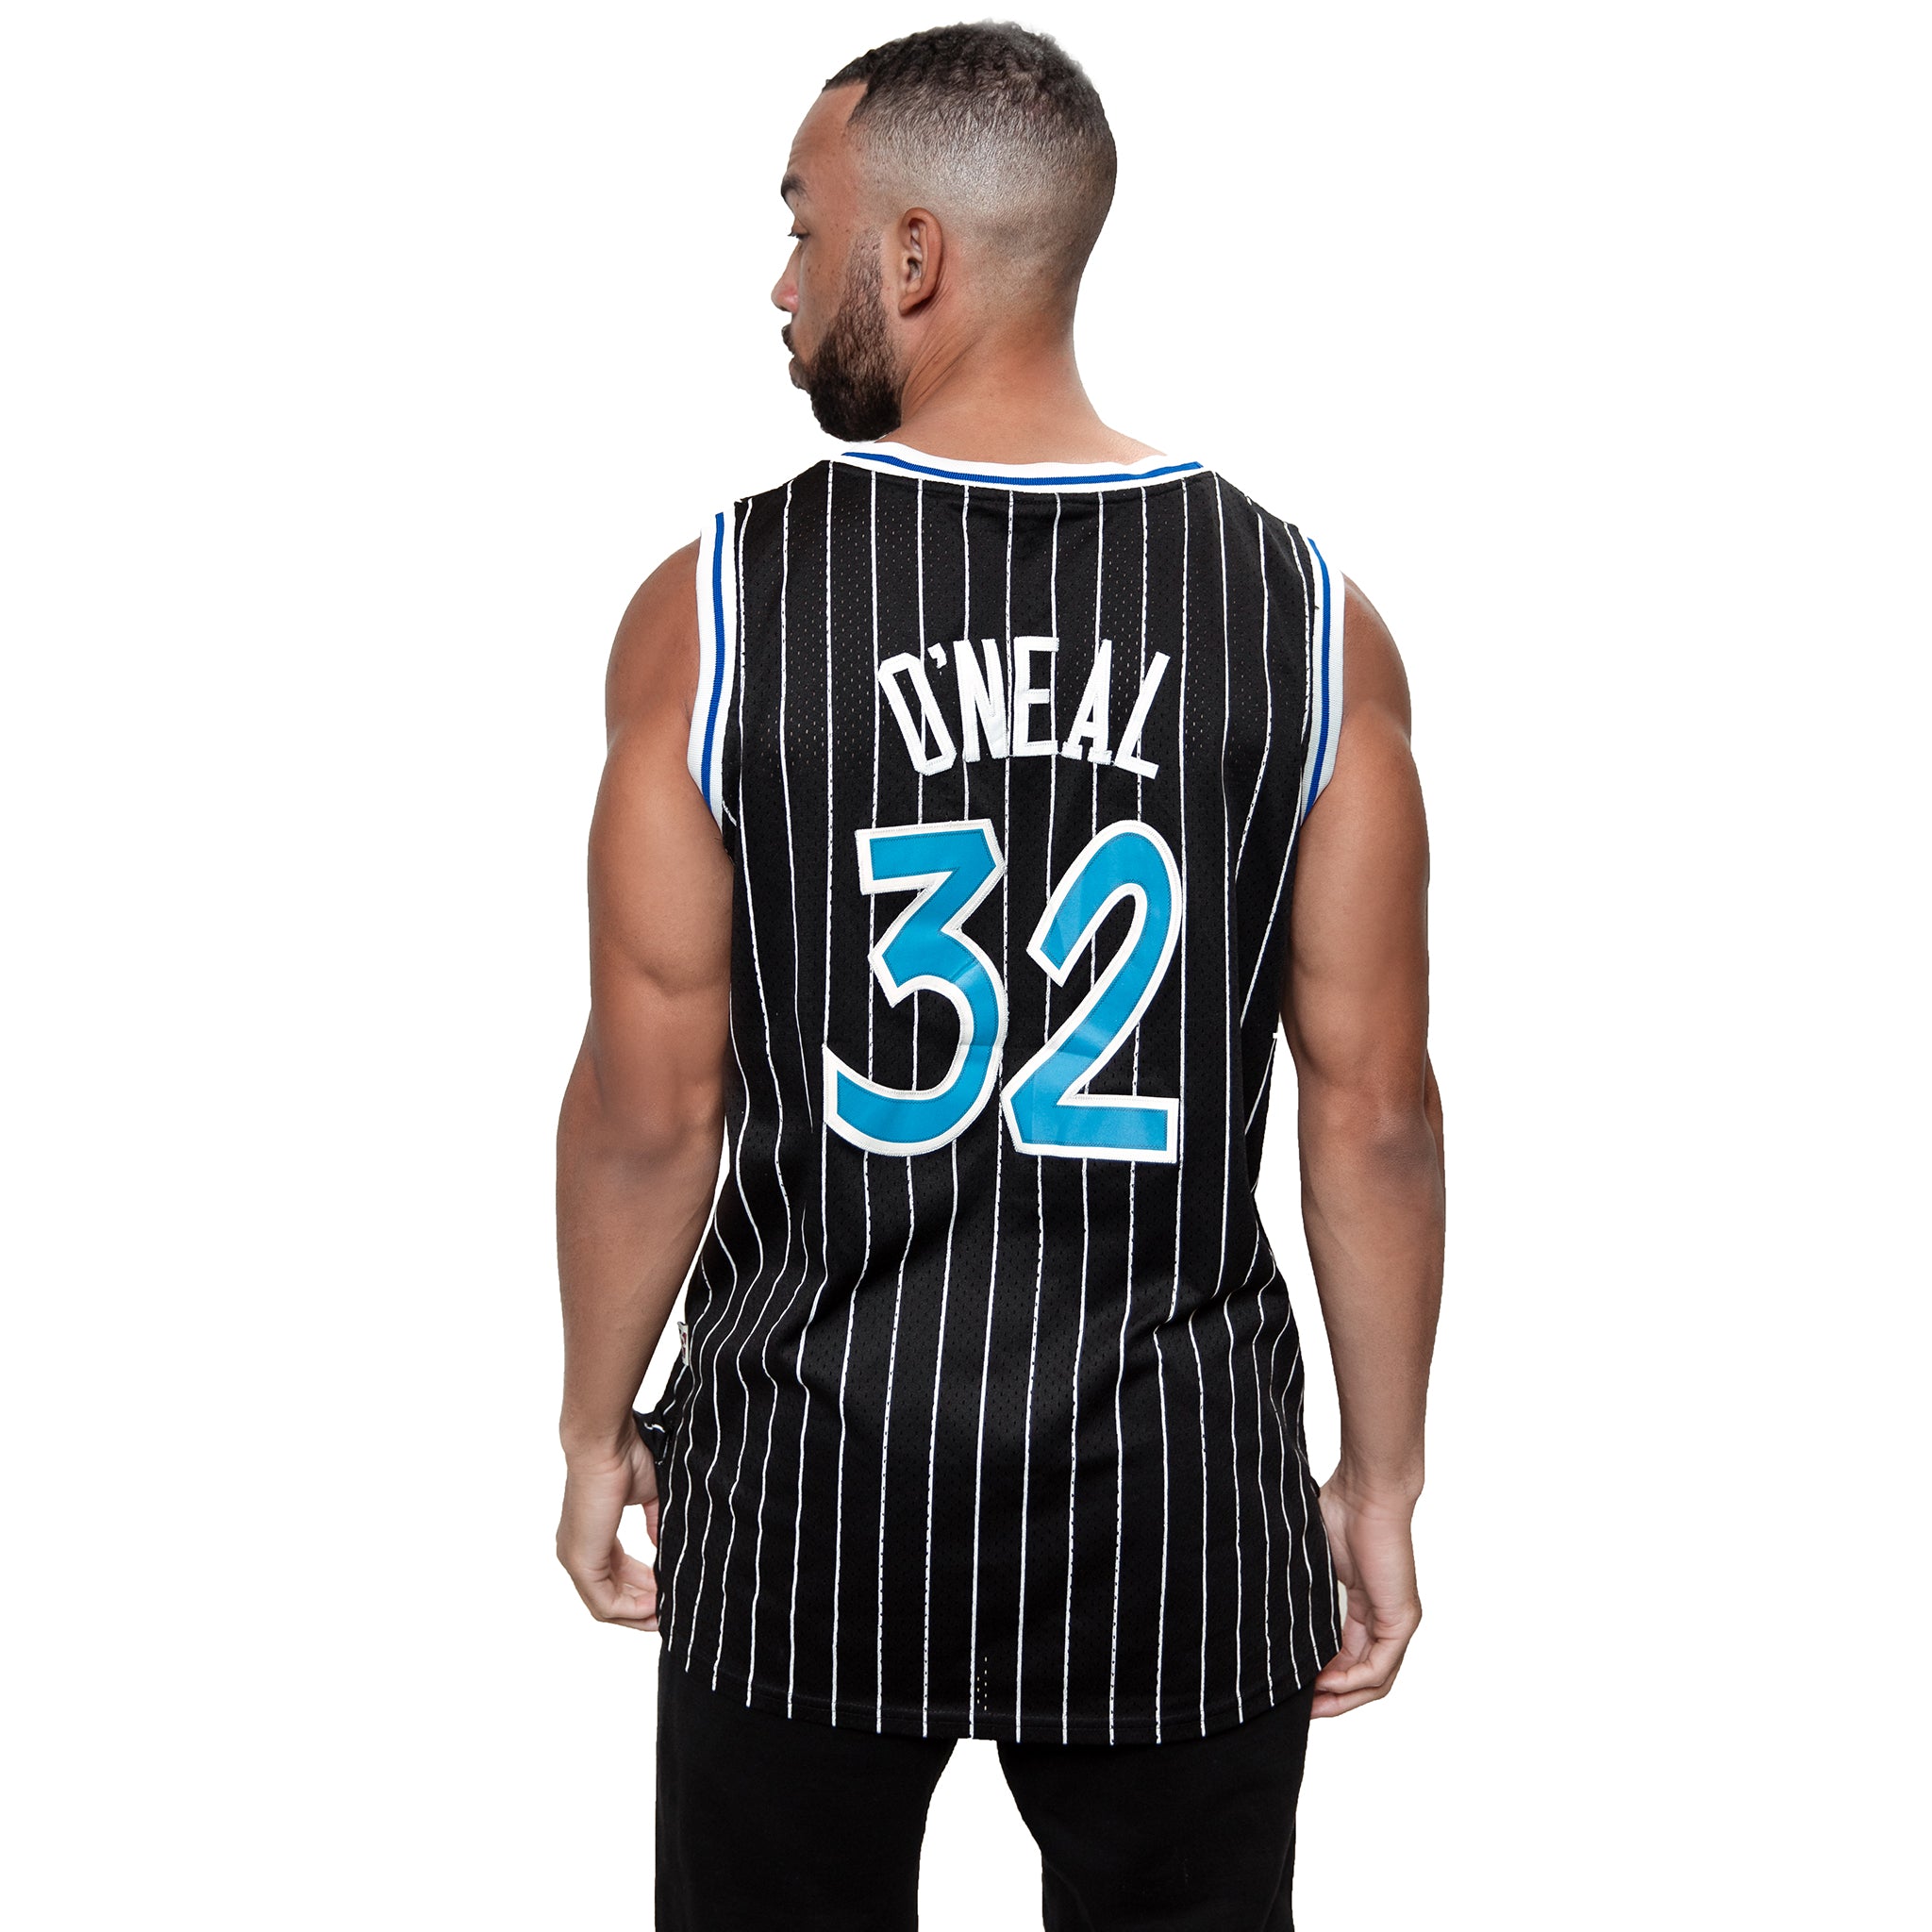 Shaq Shaquille O'neal Orlando Magic Jersey NBA Hardwood Classic Adult Size  S +2 for Sale in Glendale, CA - OfferUp